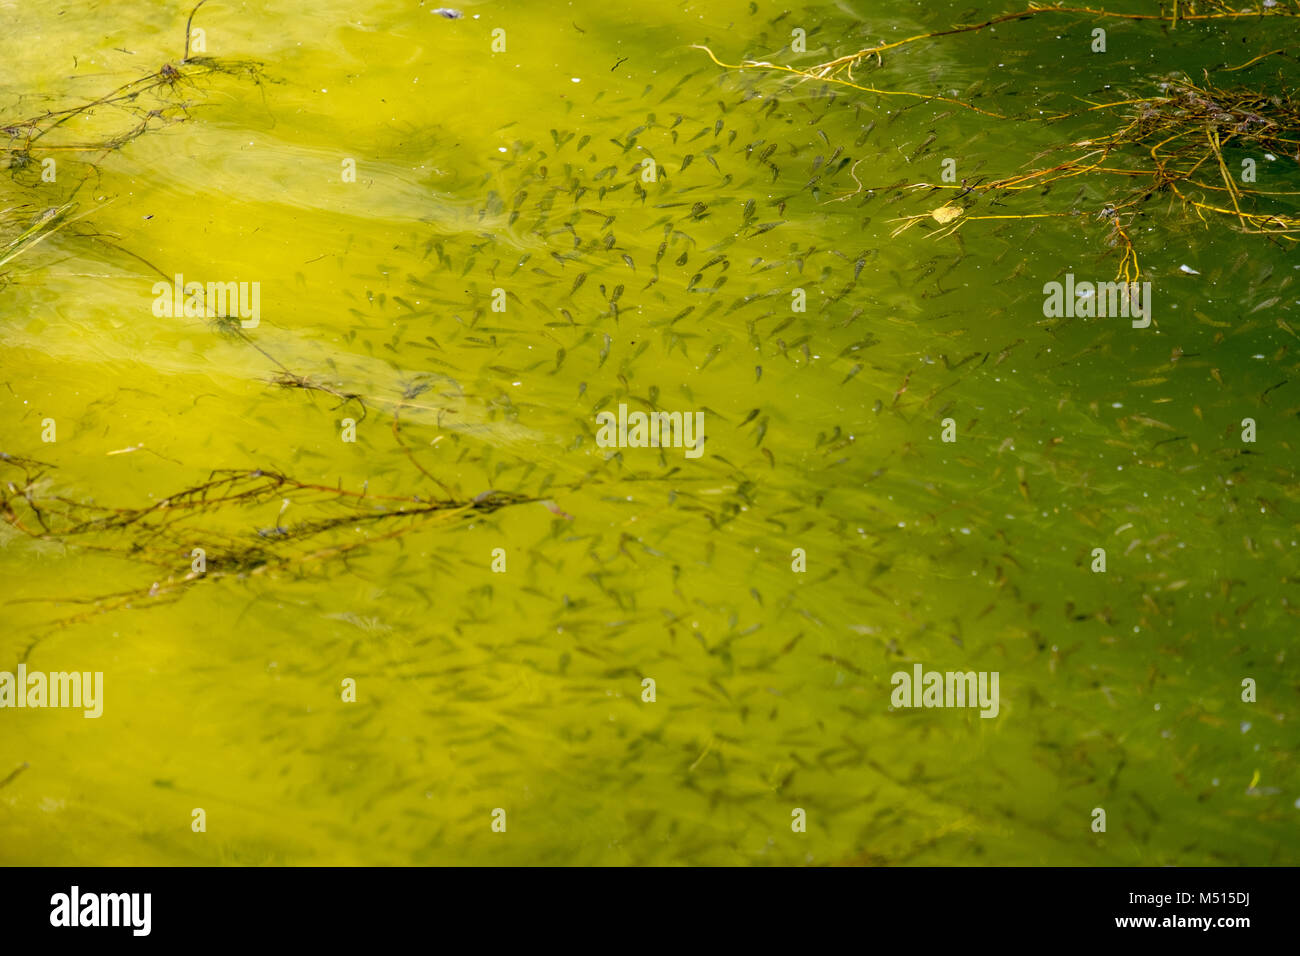 School of small fishes at local outdoor pond Stock Photo